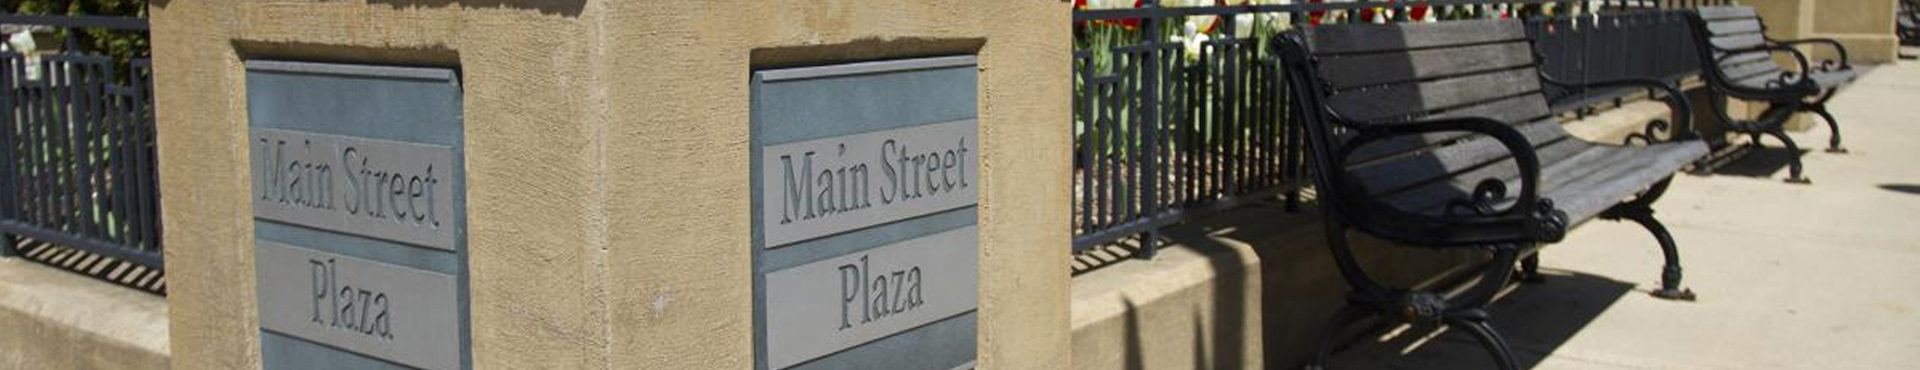 Downtown Downers Grove Main Street sign